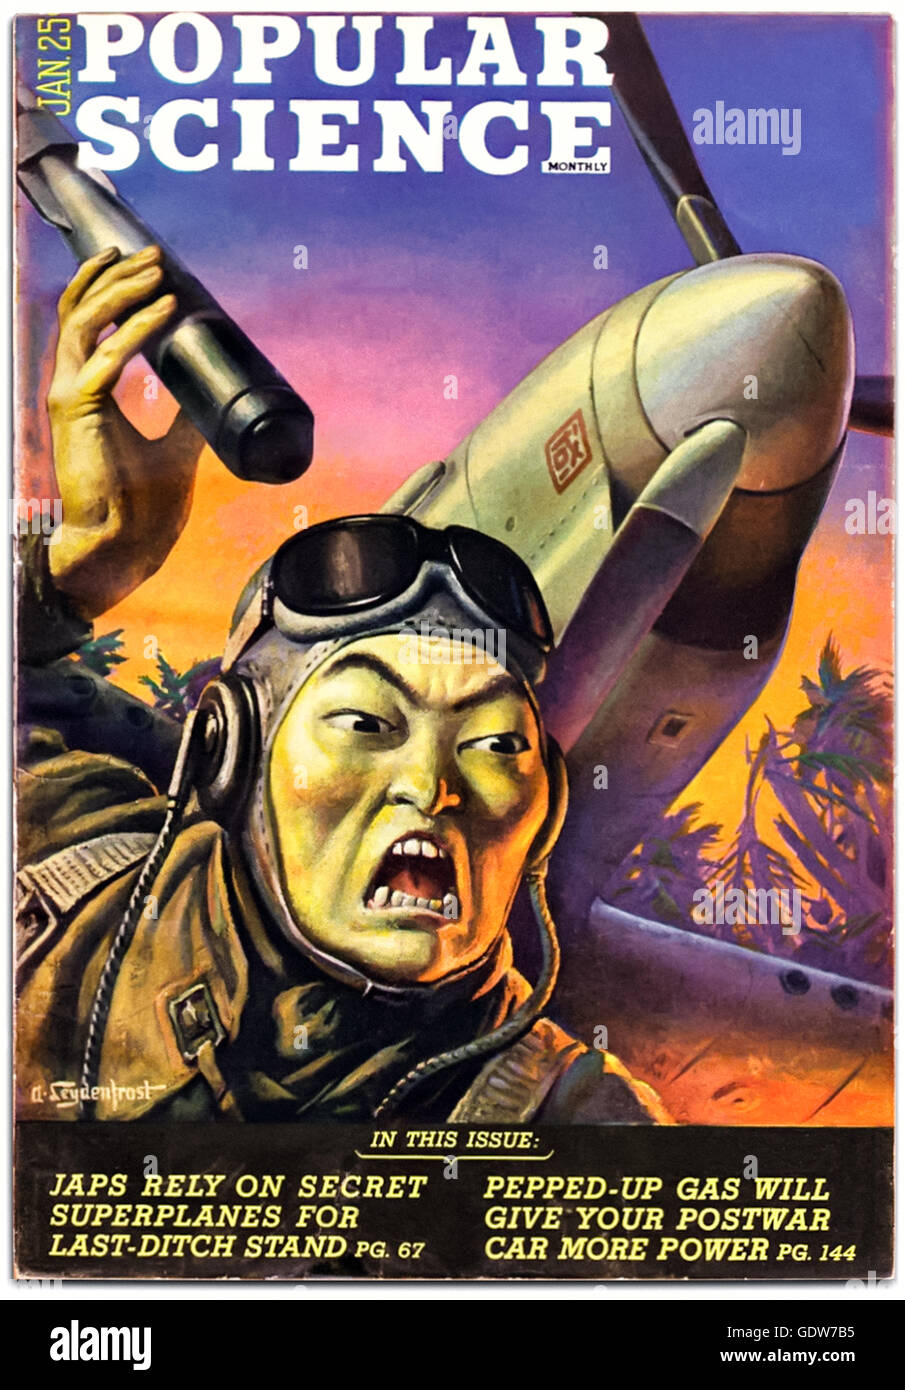 Front cover of “Popular Science” January 1945, typical of WW2 anti-Japanese propaganda depicting the “Yellow Peril”, exaggerated teeth and skin colour added to the menacing Imperial Japanese pilot holding a Type 2 - 1/3 kg H.E.A.T. Cluster Bomb. See description for more information. Stock Photo